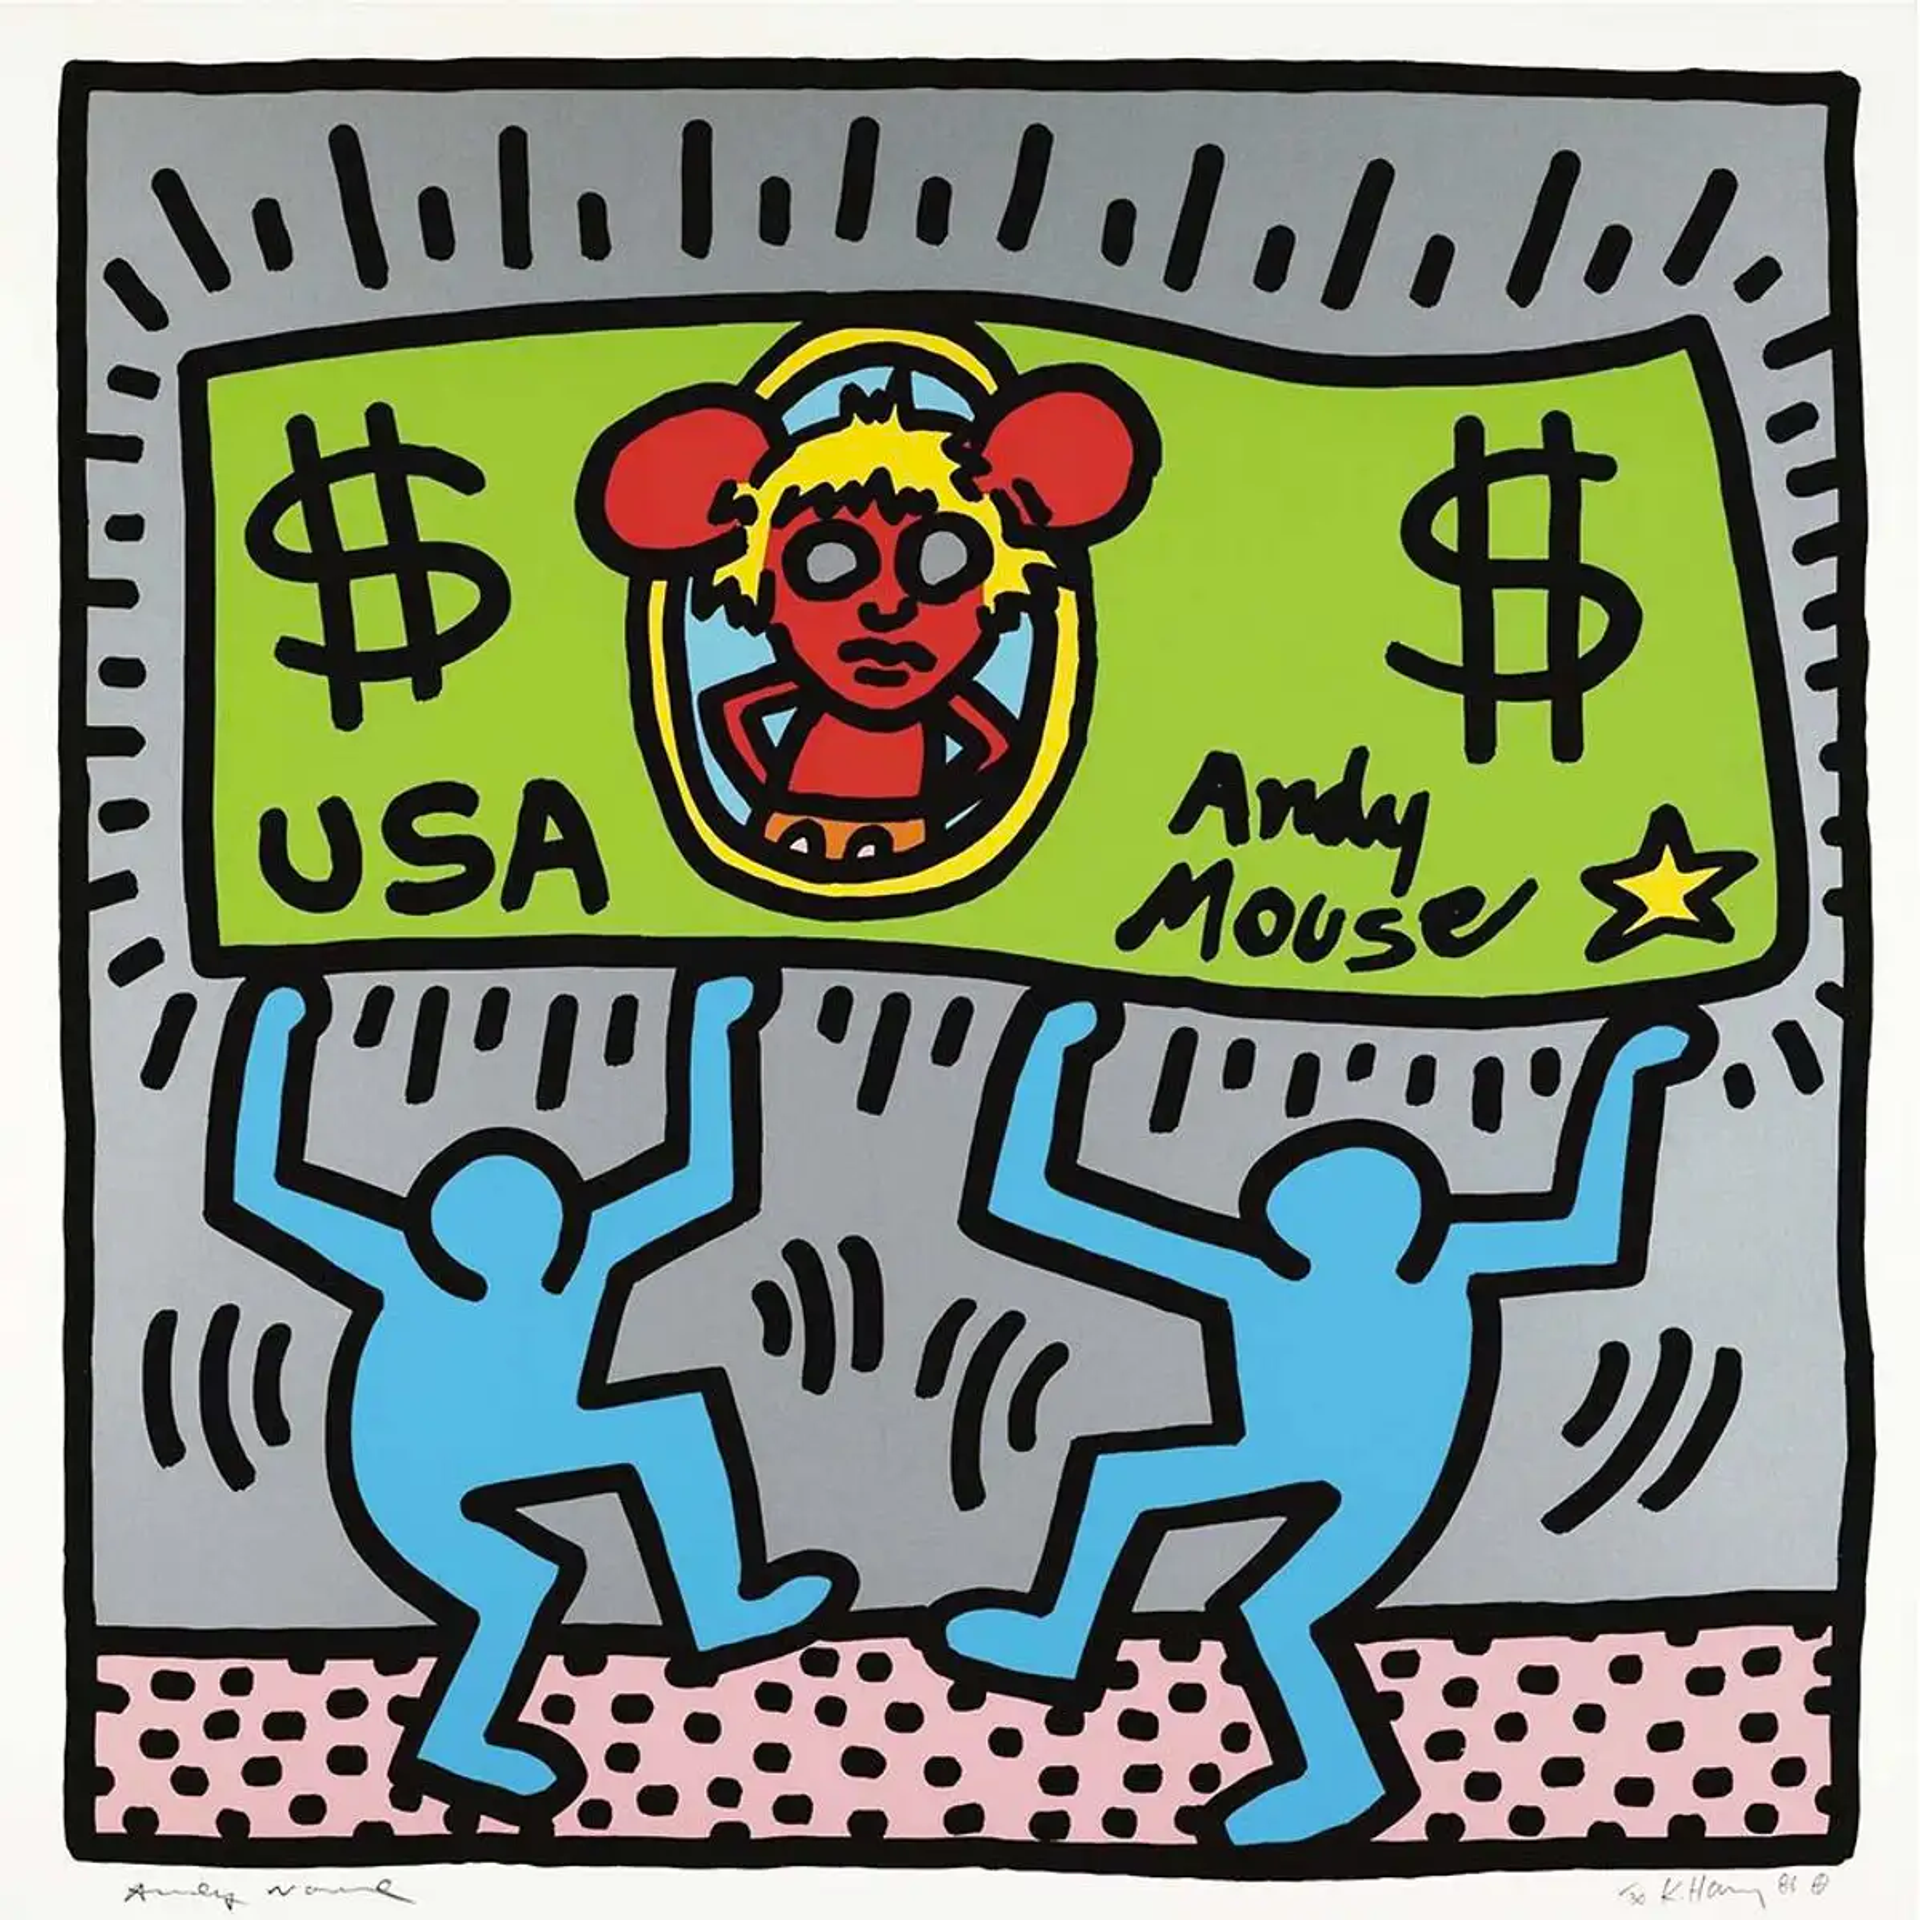 An image of the print Andy Mouse 3 by Keith Haring, featuring two dancing figures holding aloft a large dollar bill with the figure of a spiky haired Andy Warhol with Mickey Mouse ears.